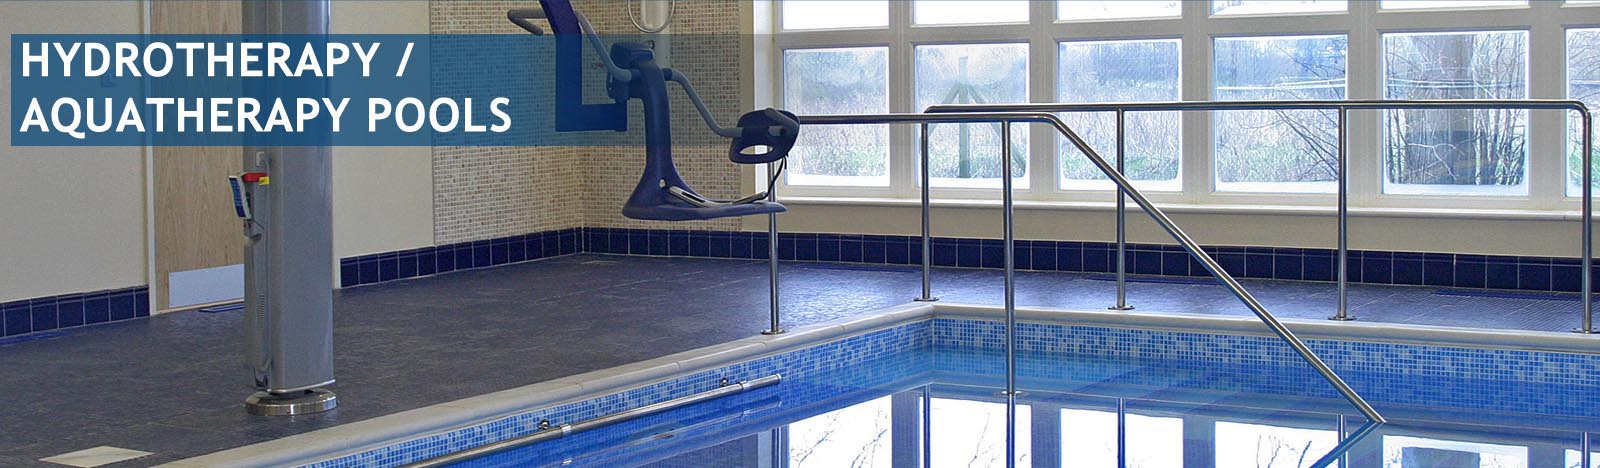 hydrotherapy pools manchester